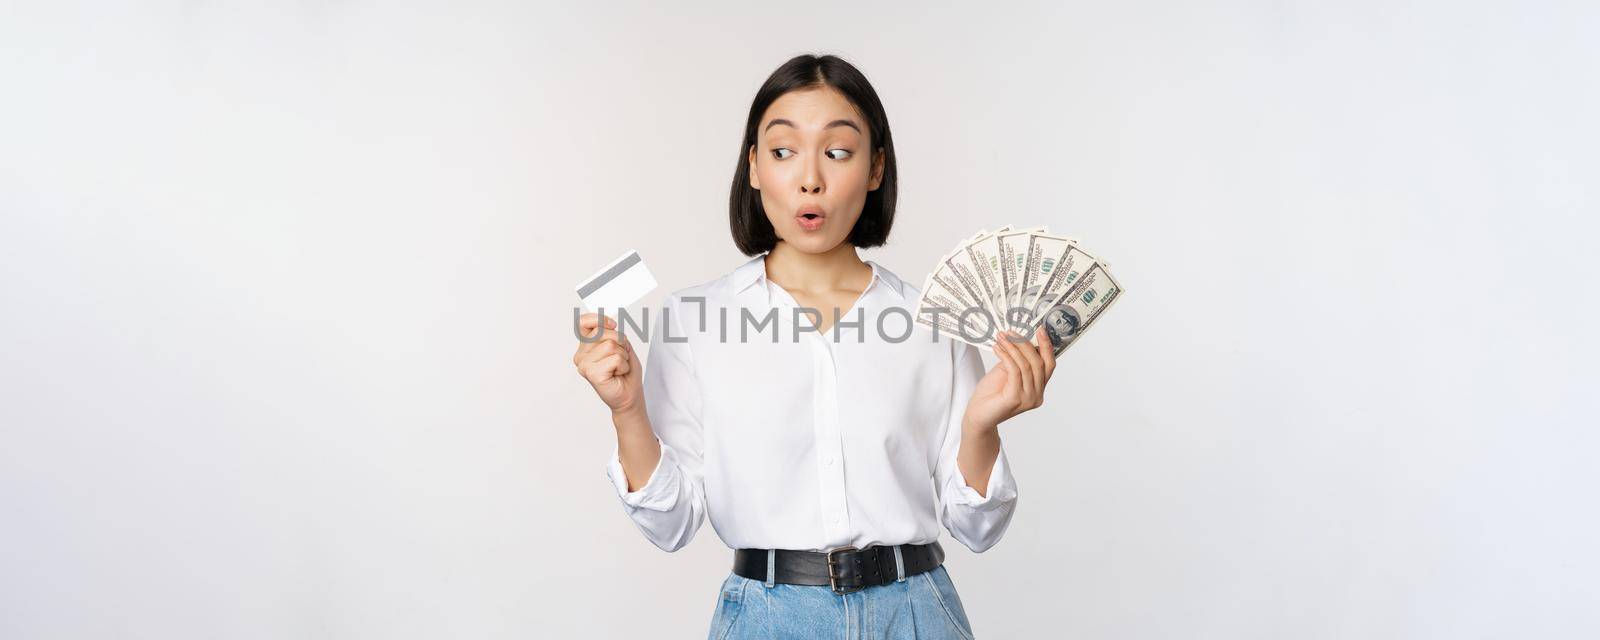 Excited korean girl looking at credit card, holding money cash, posing against studio background. Finance concept